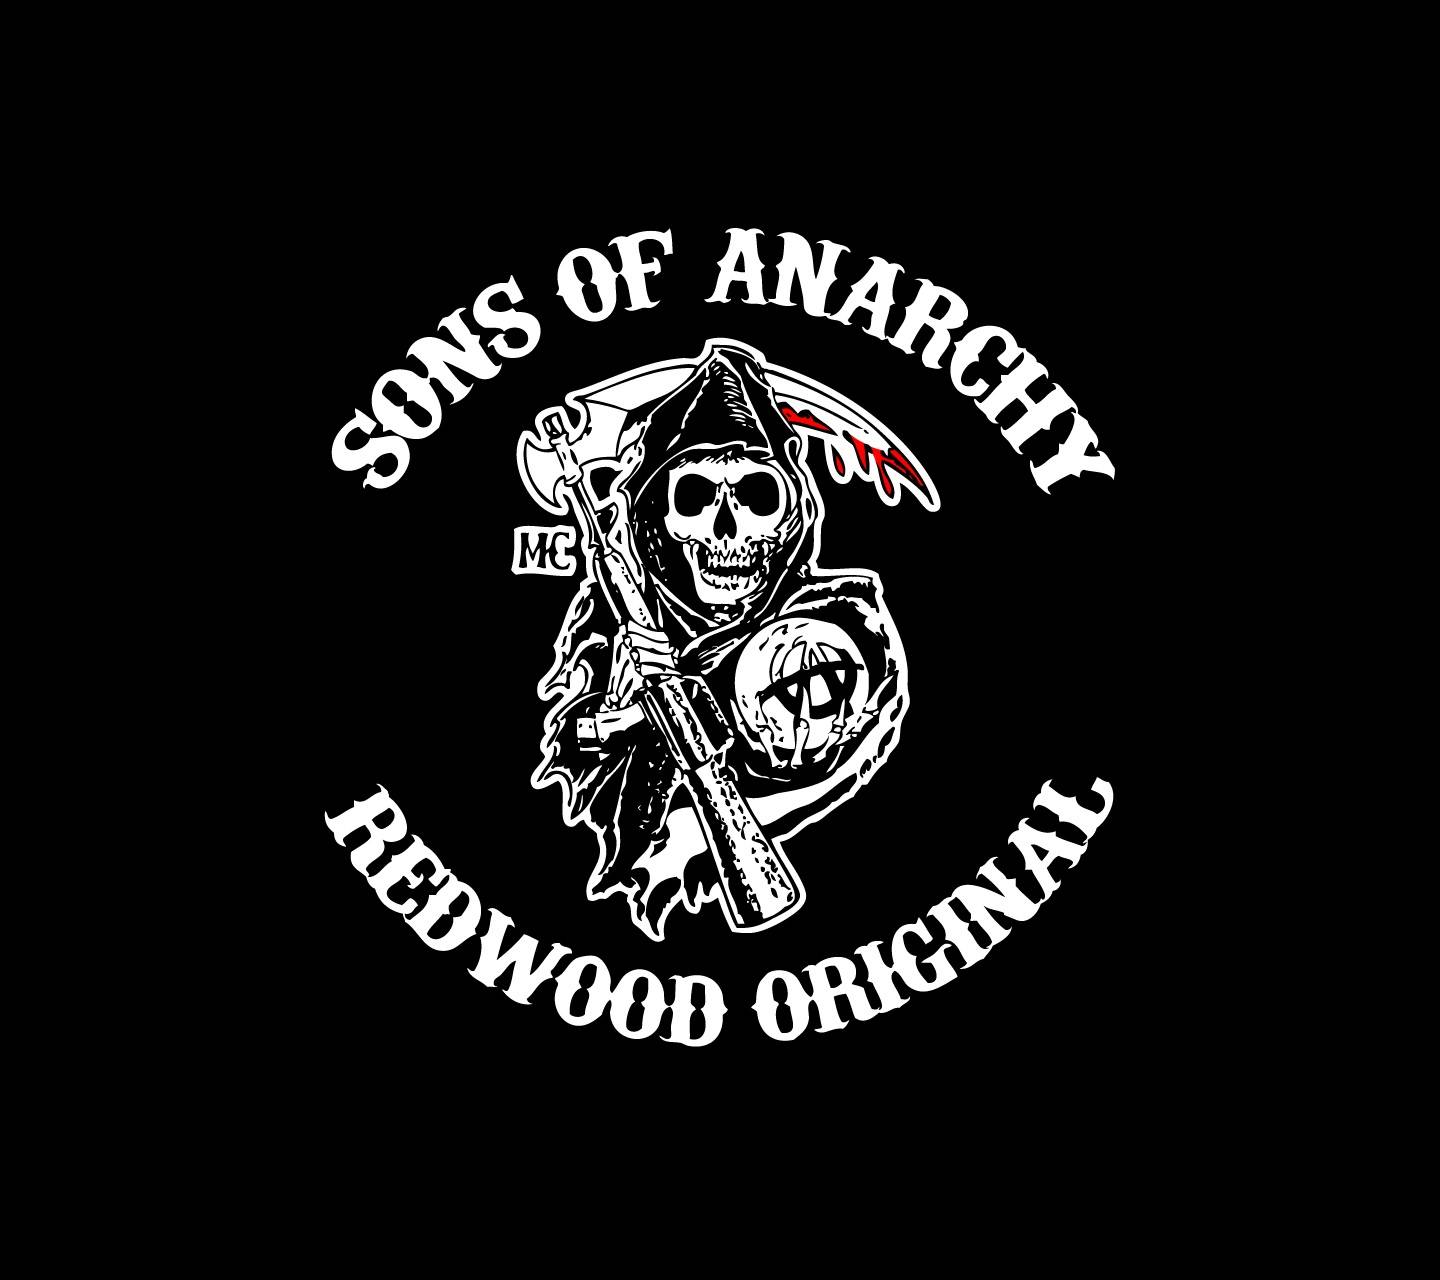 Download free sons of anarchy wallpaper for your mobile phone